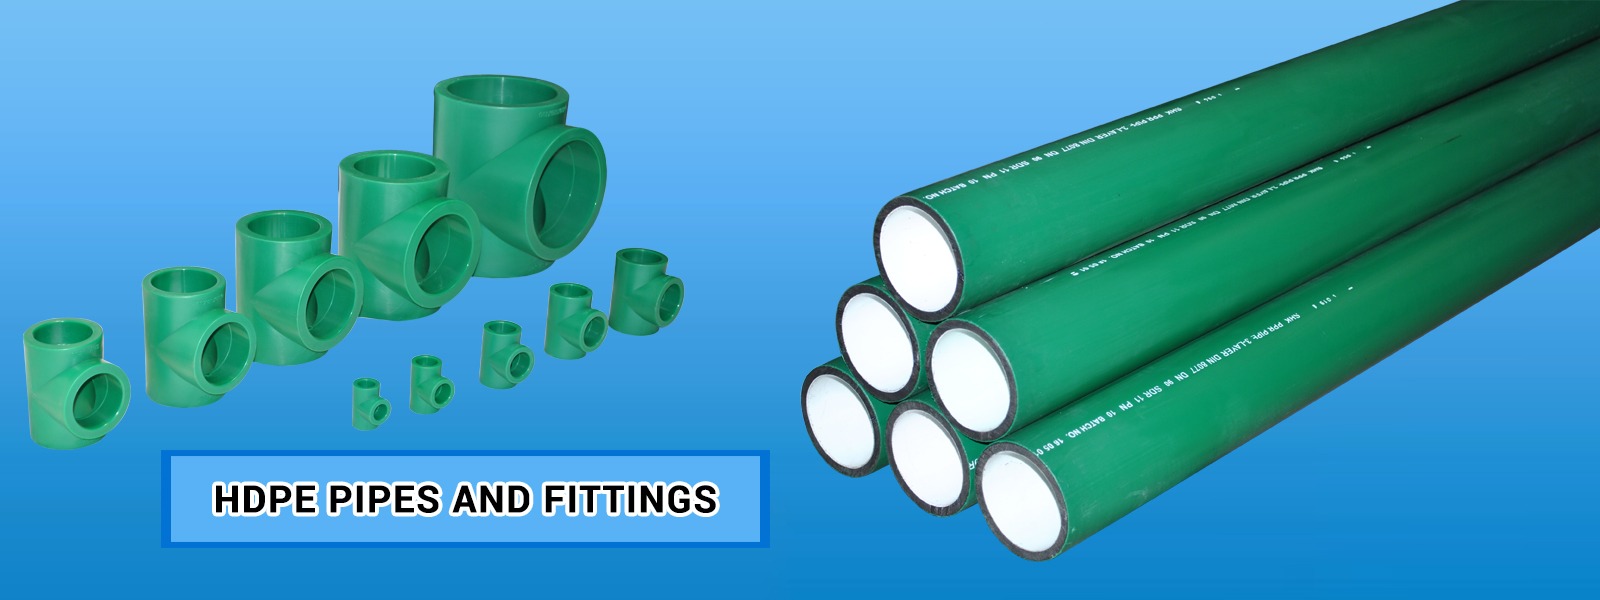 PPr Pipes Exporter in India